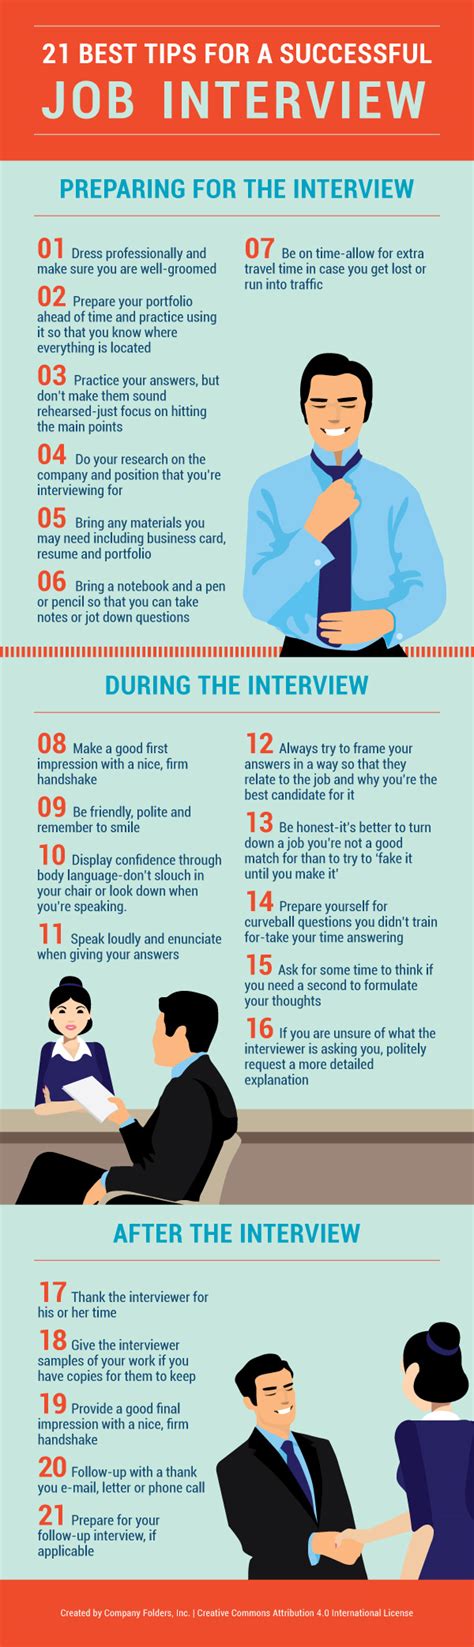 21 Best Tips For A Successful Job Interview Infographic Executive